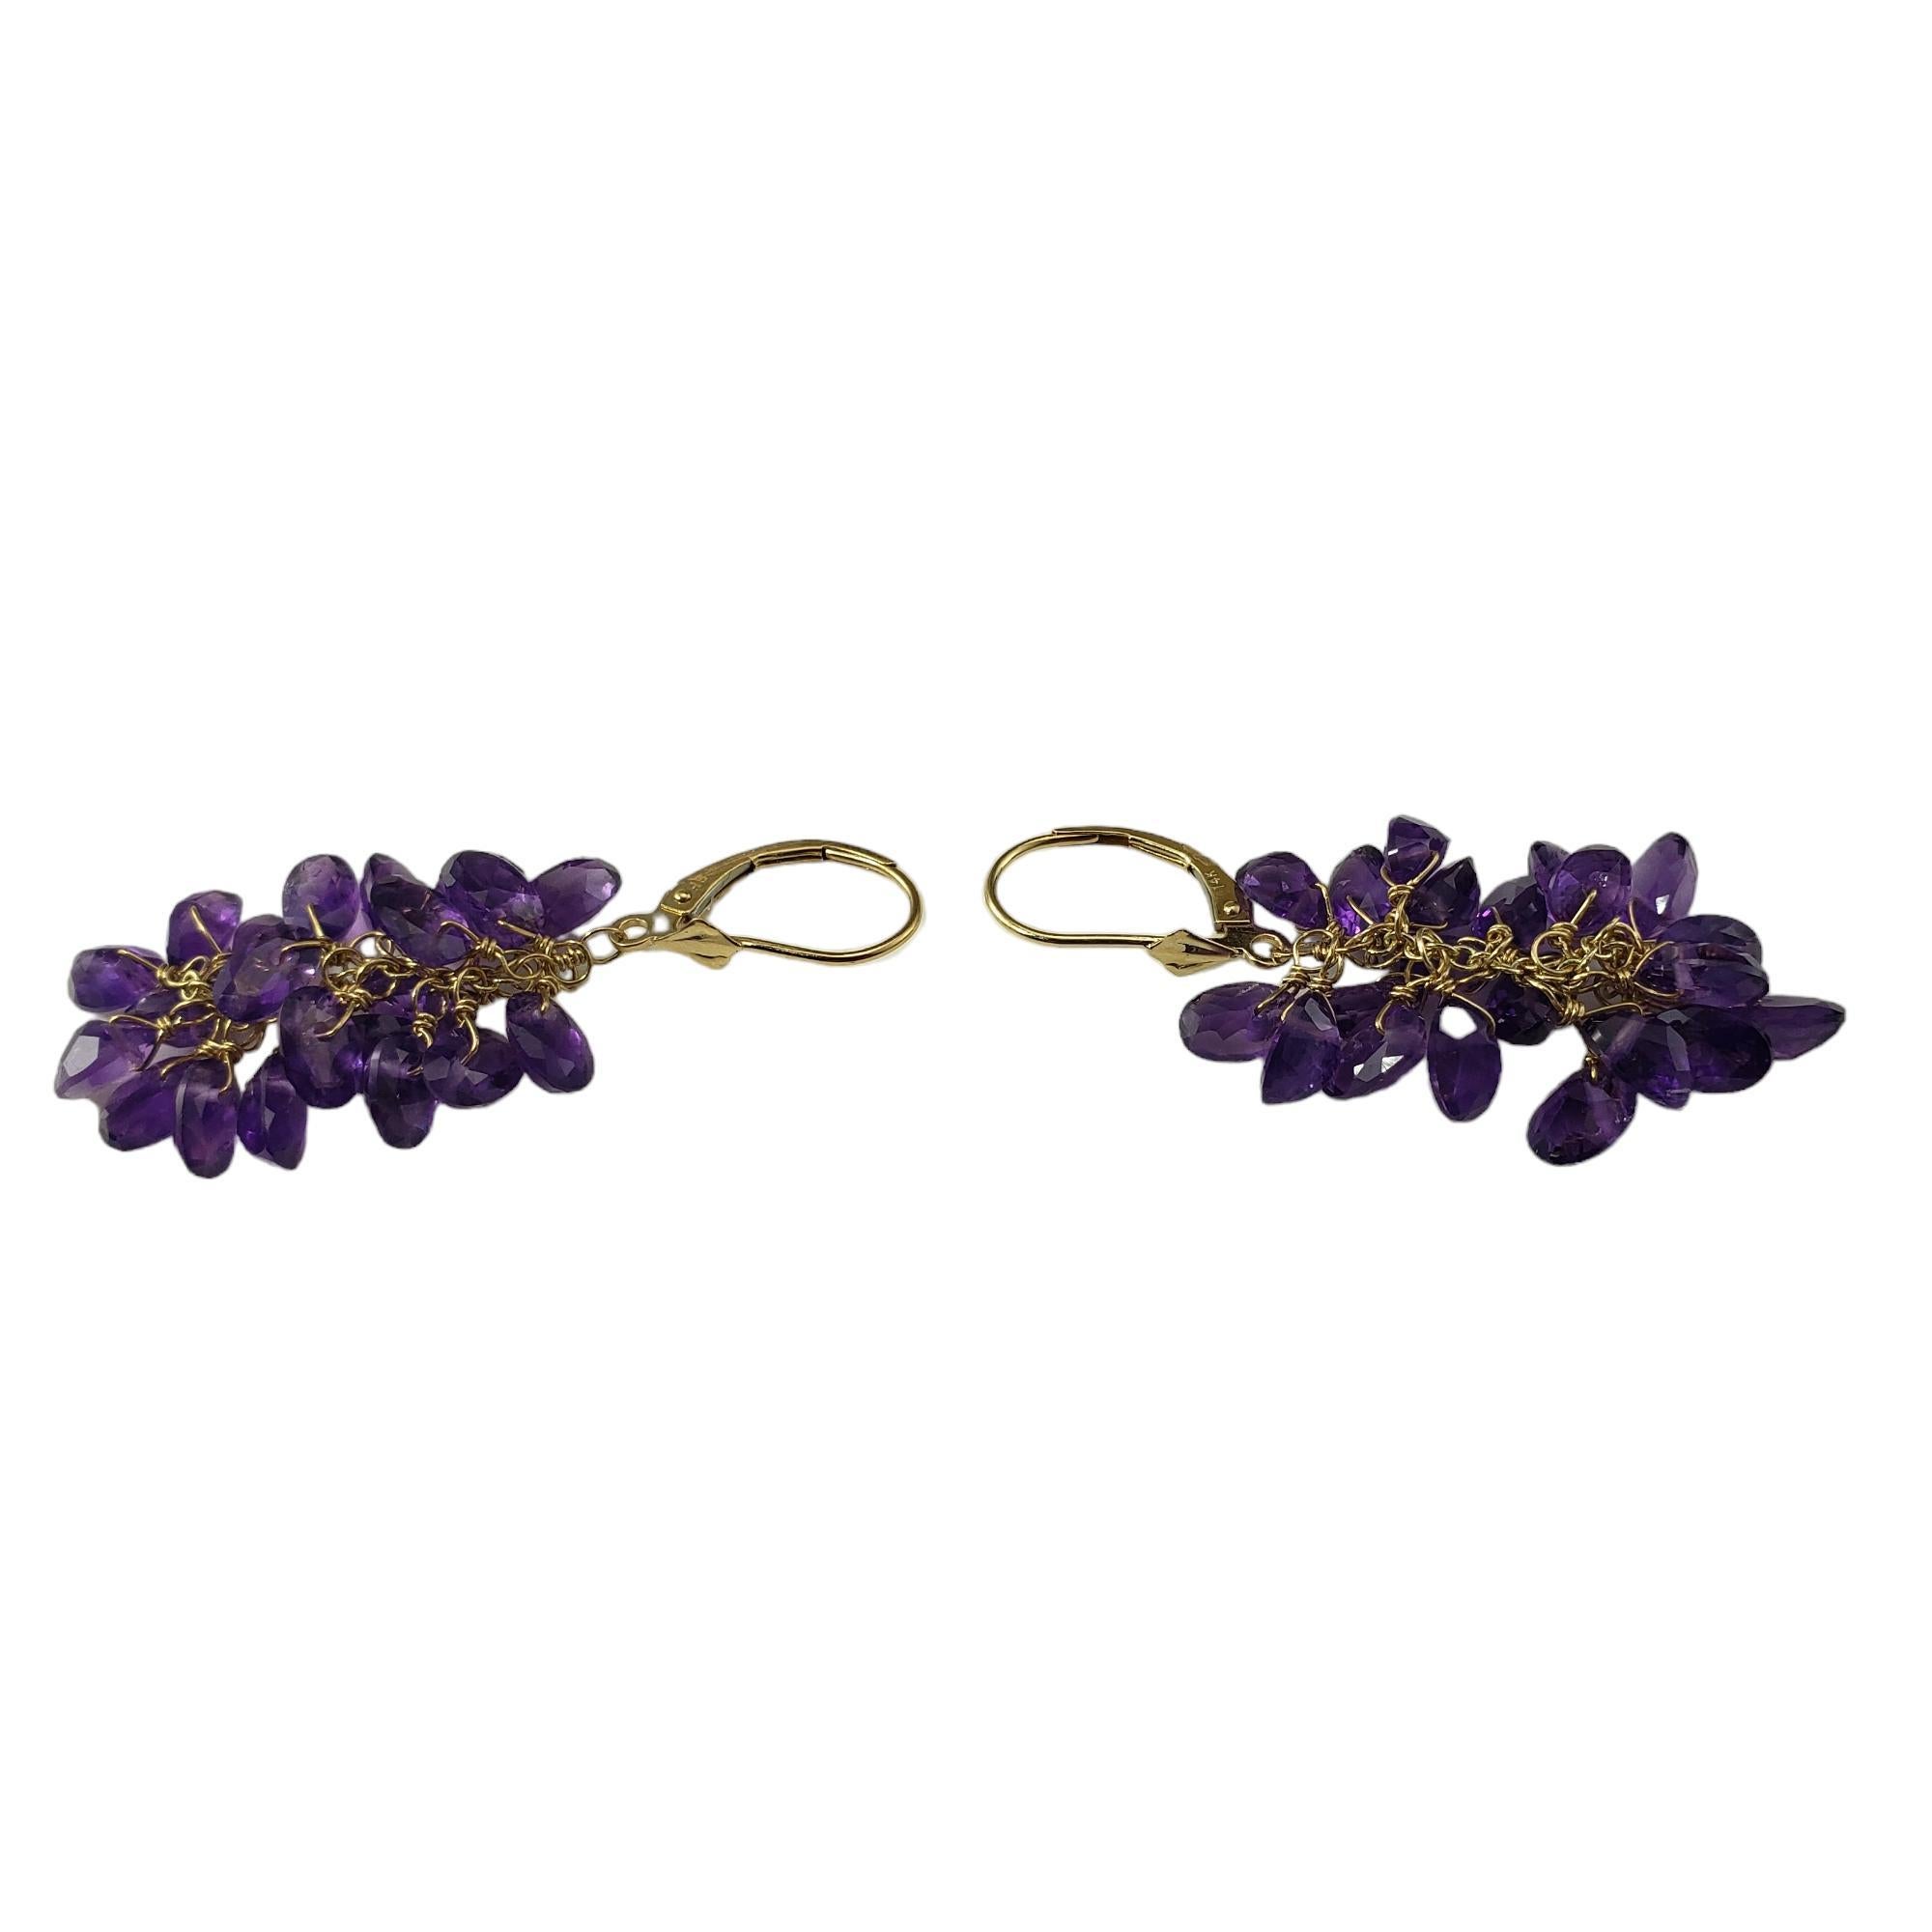 14 Karat Yellow Gold and Amethyst Dangle Earrings

These elegant dangle earrings each feature 20 faceted amethyst stones set in classic 14K yellow gold.  Hinged closures.

Size: 2 inches x 0.6 inches

Stamped: 14K   SF

Weight: 3.6 dwt./ 5.7